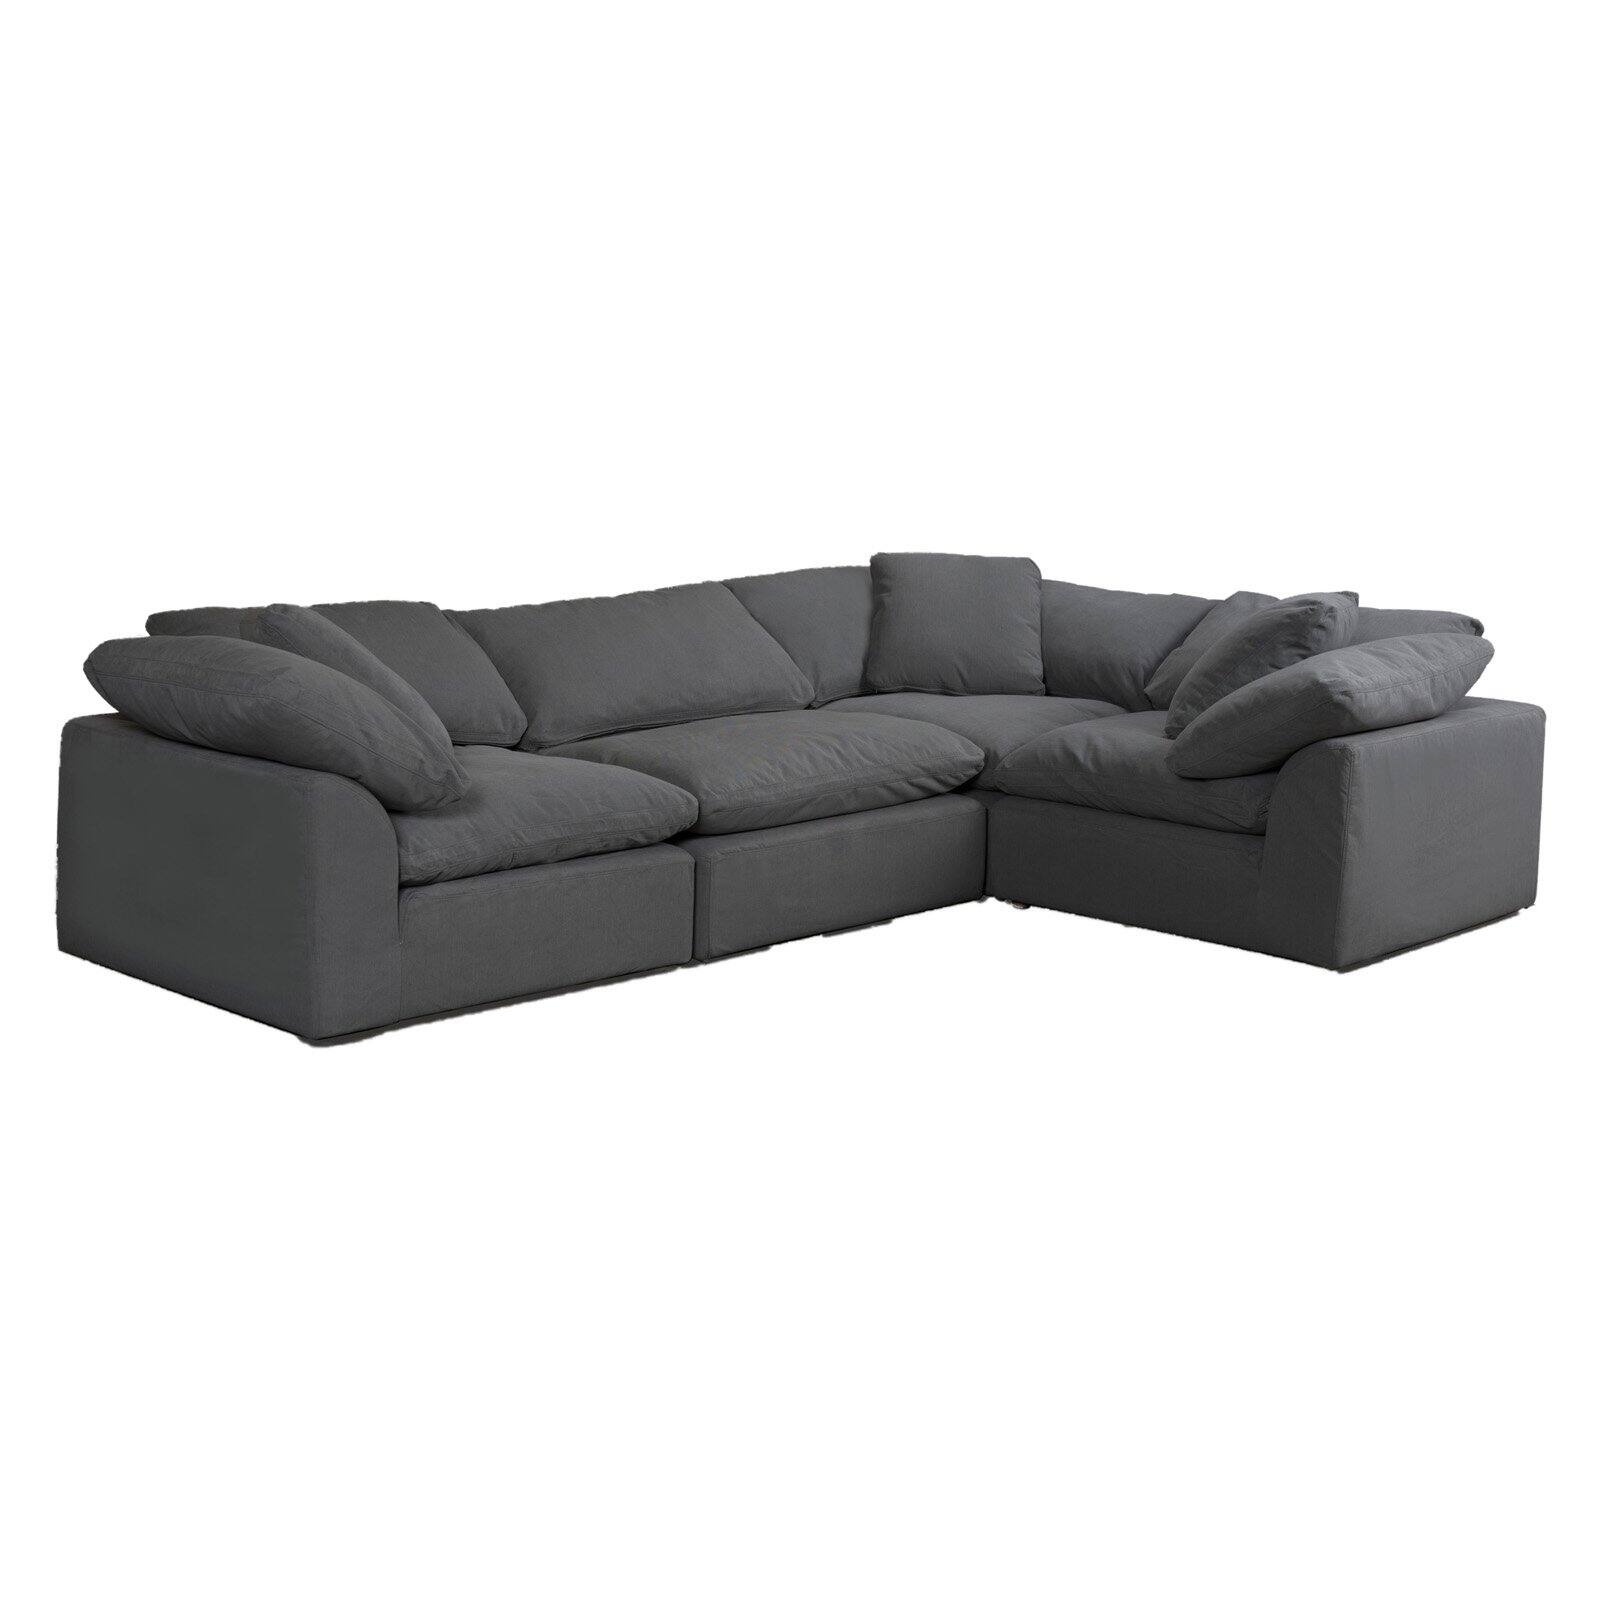 Sunset Trading 4 Piece Slipcovered Modular L Shaped Sectional Sofa - image 1 of 4